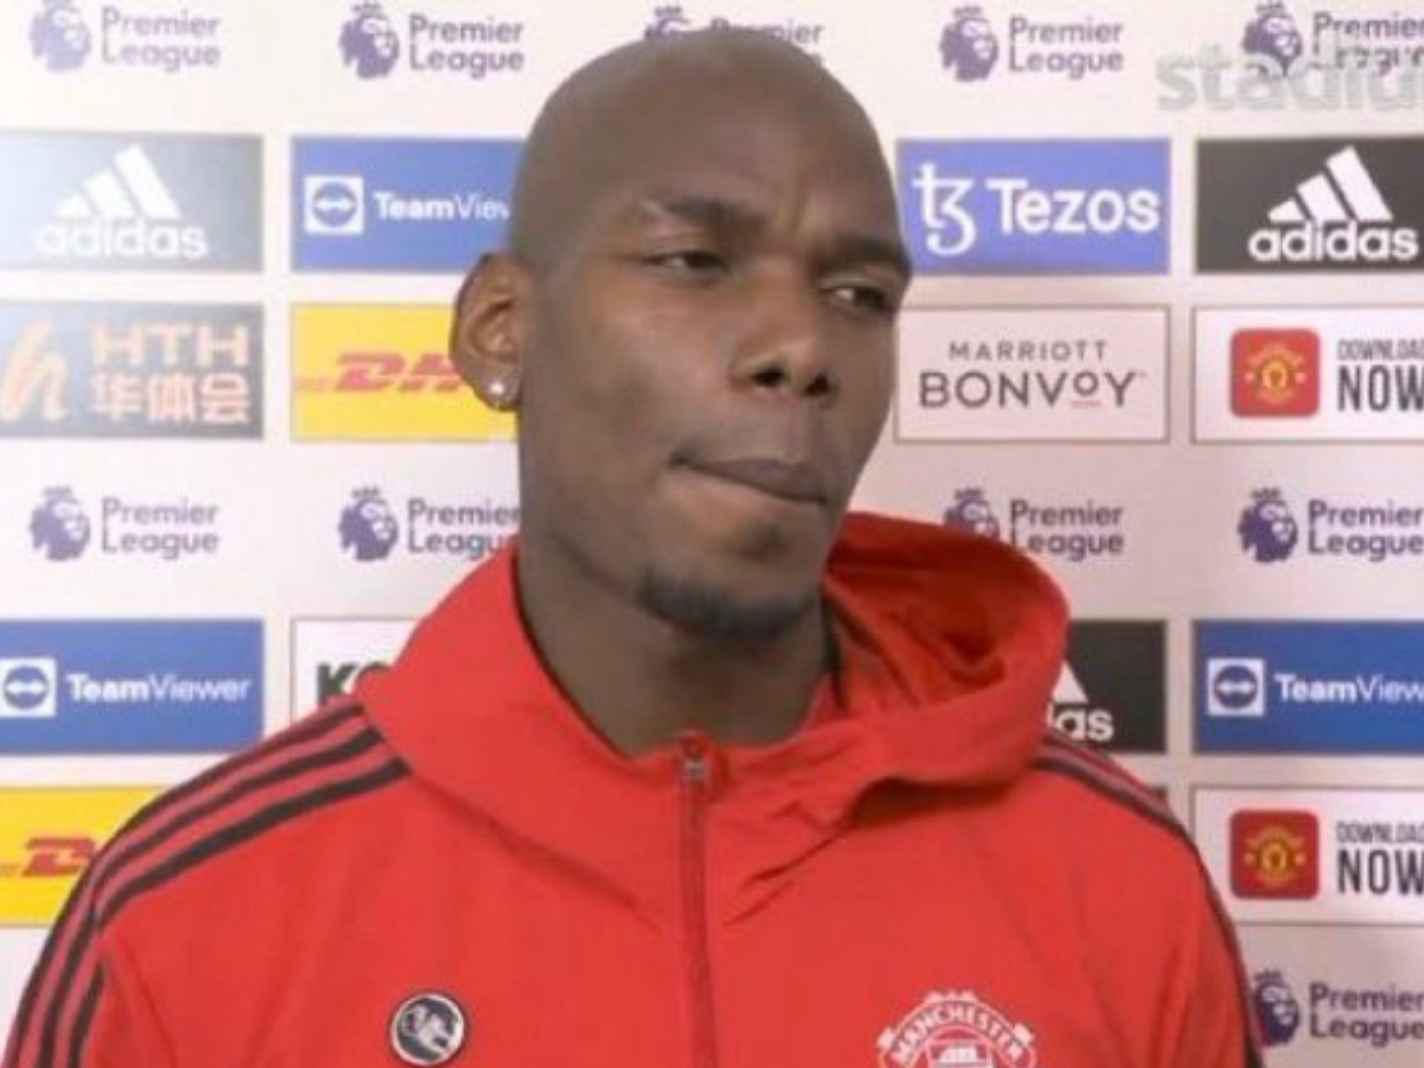 Paul Pogba shows his new bald look